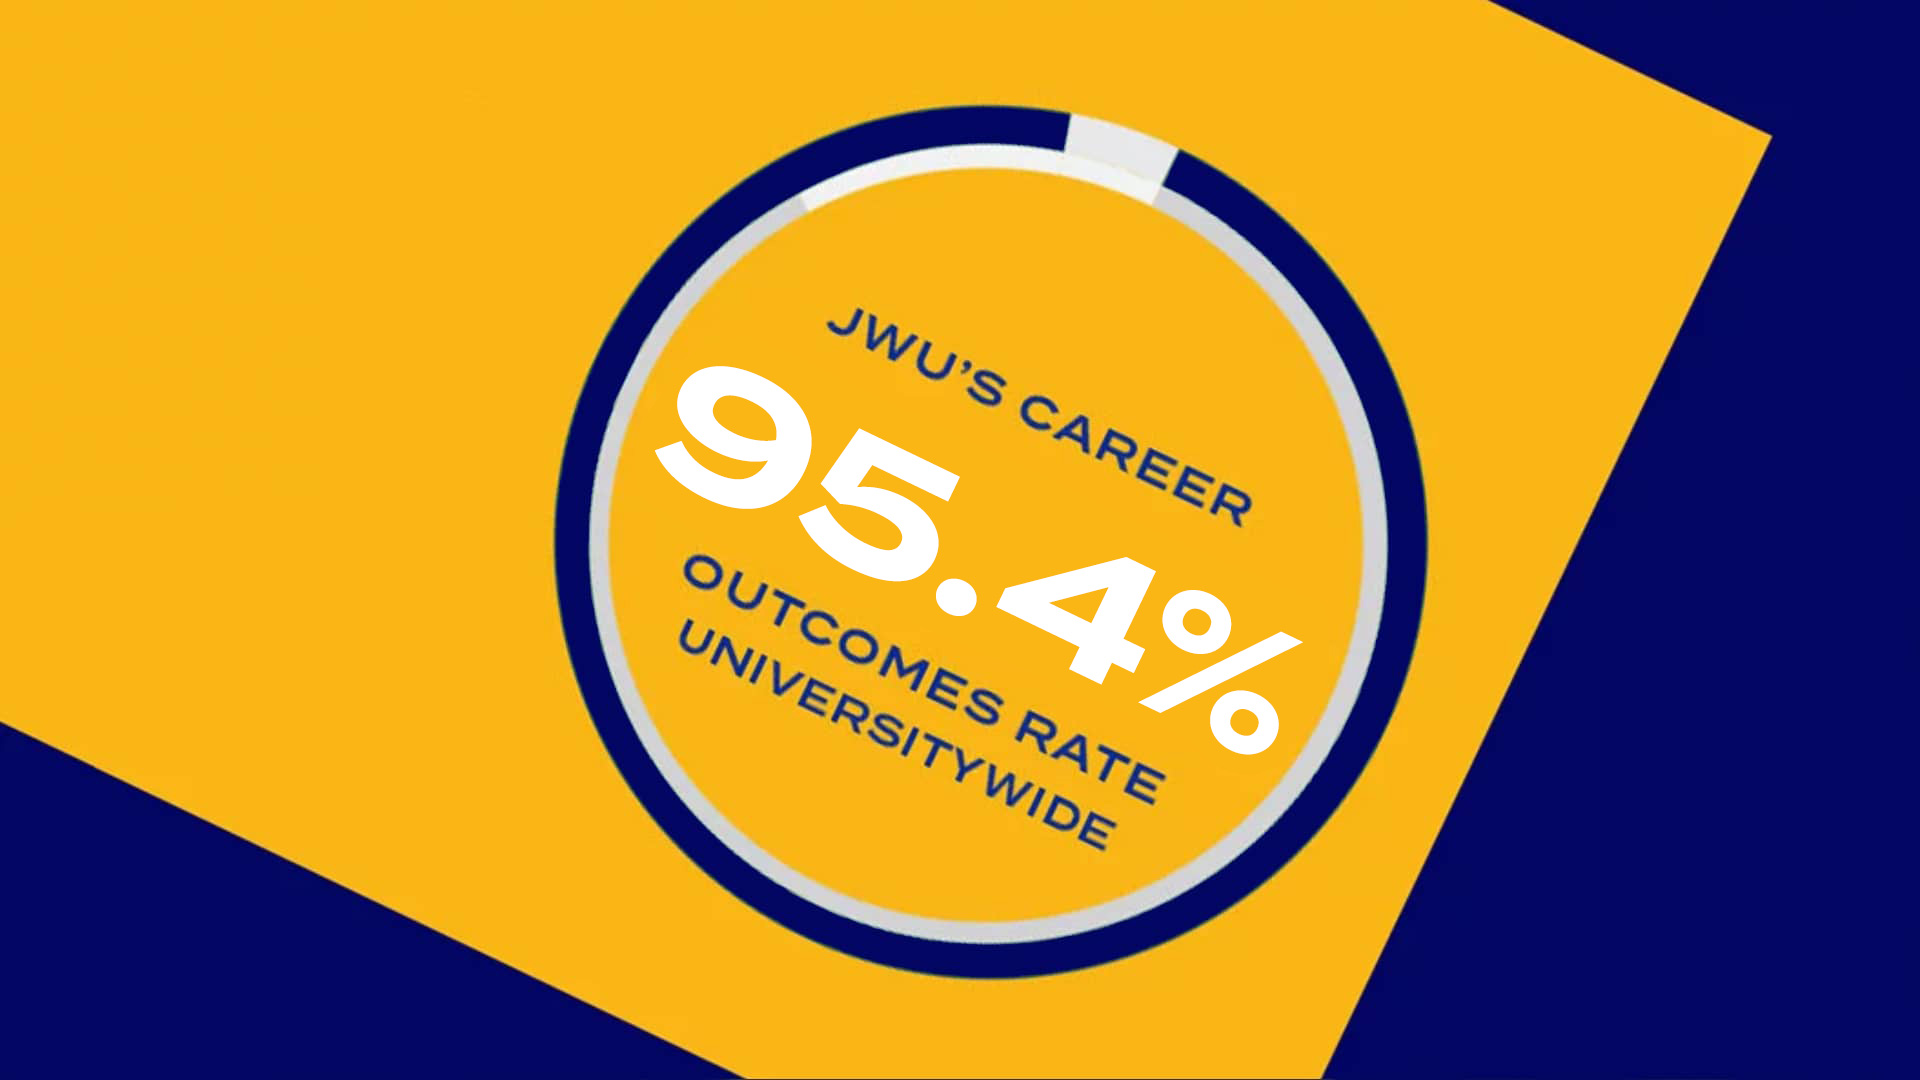 JWU’s career outcomes rate is 96.8% universitywide